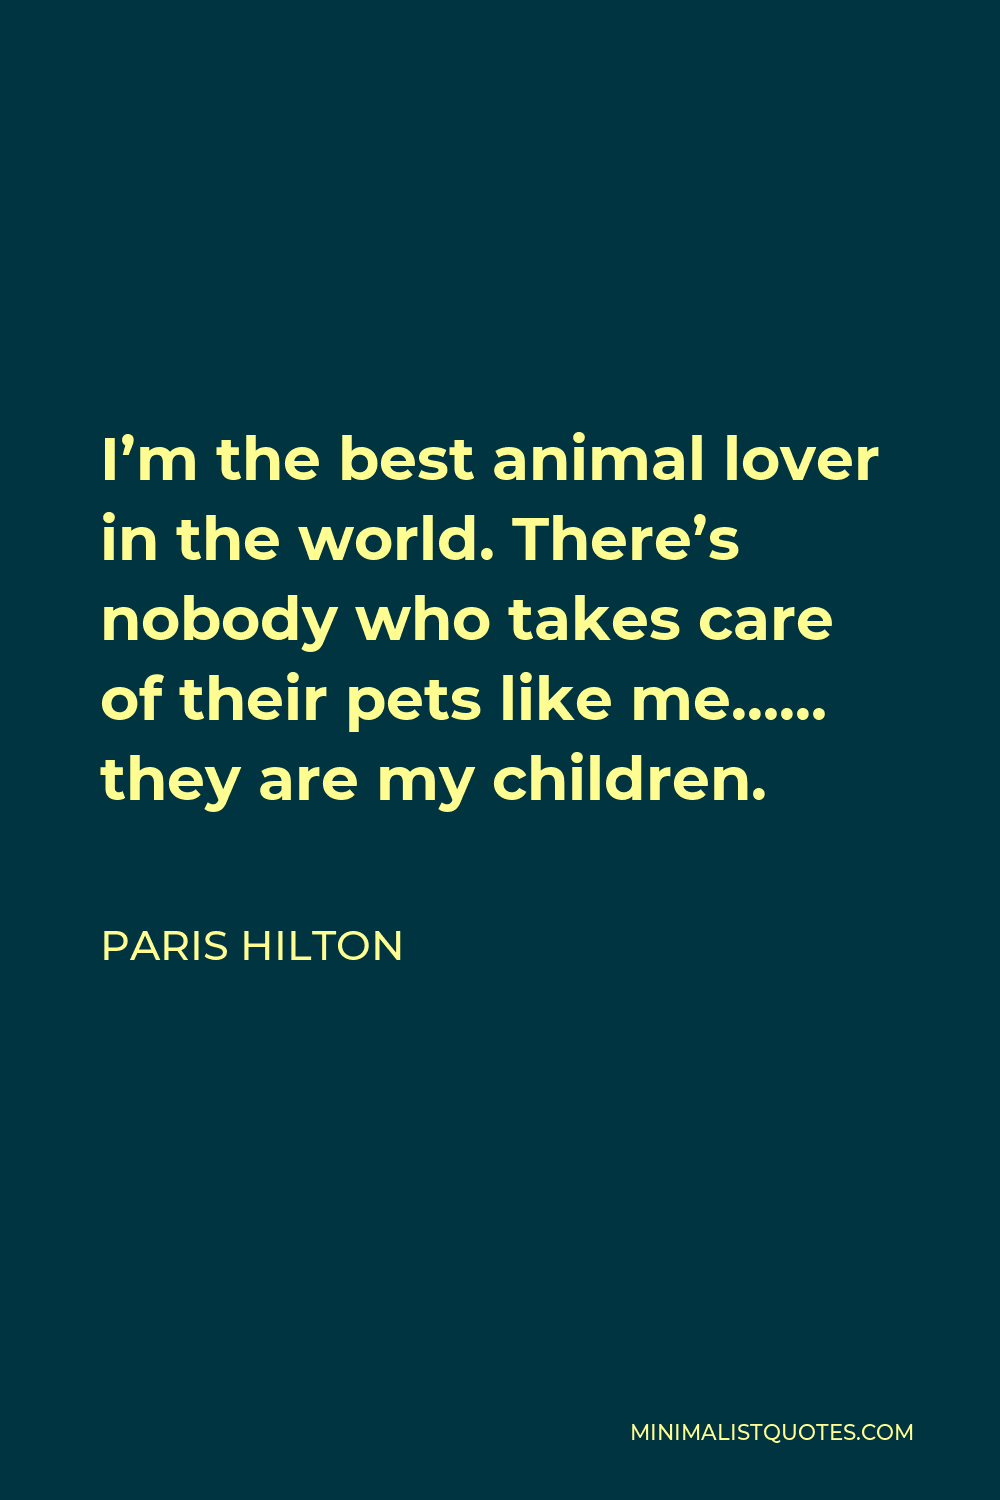 Paris Hilton Quote - I’m the best animal lover in the world. There’s nobody who takes care of their pets like me…… they are my children.